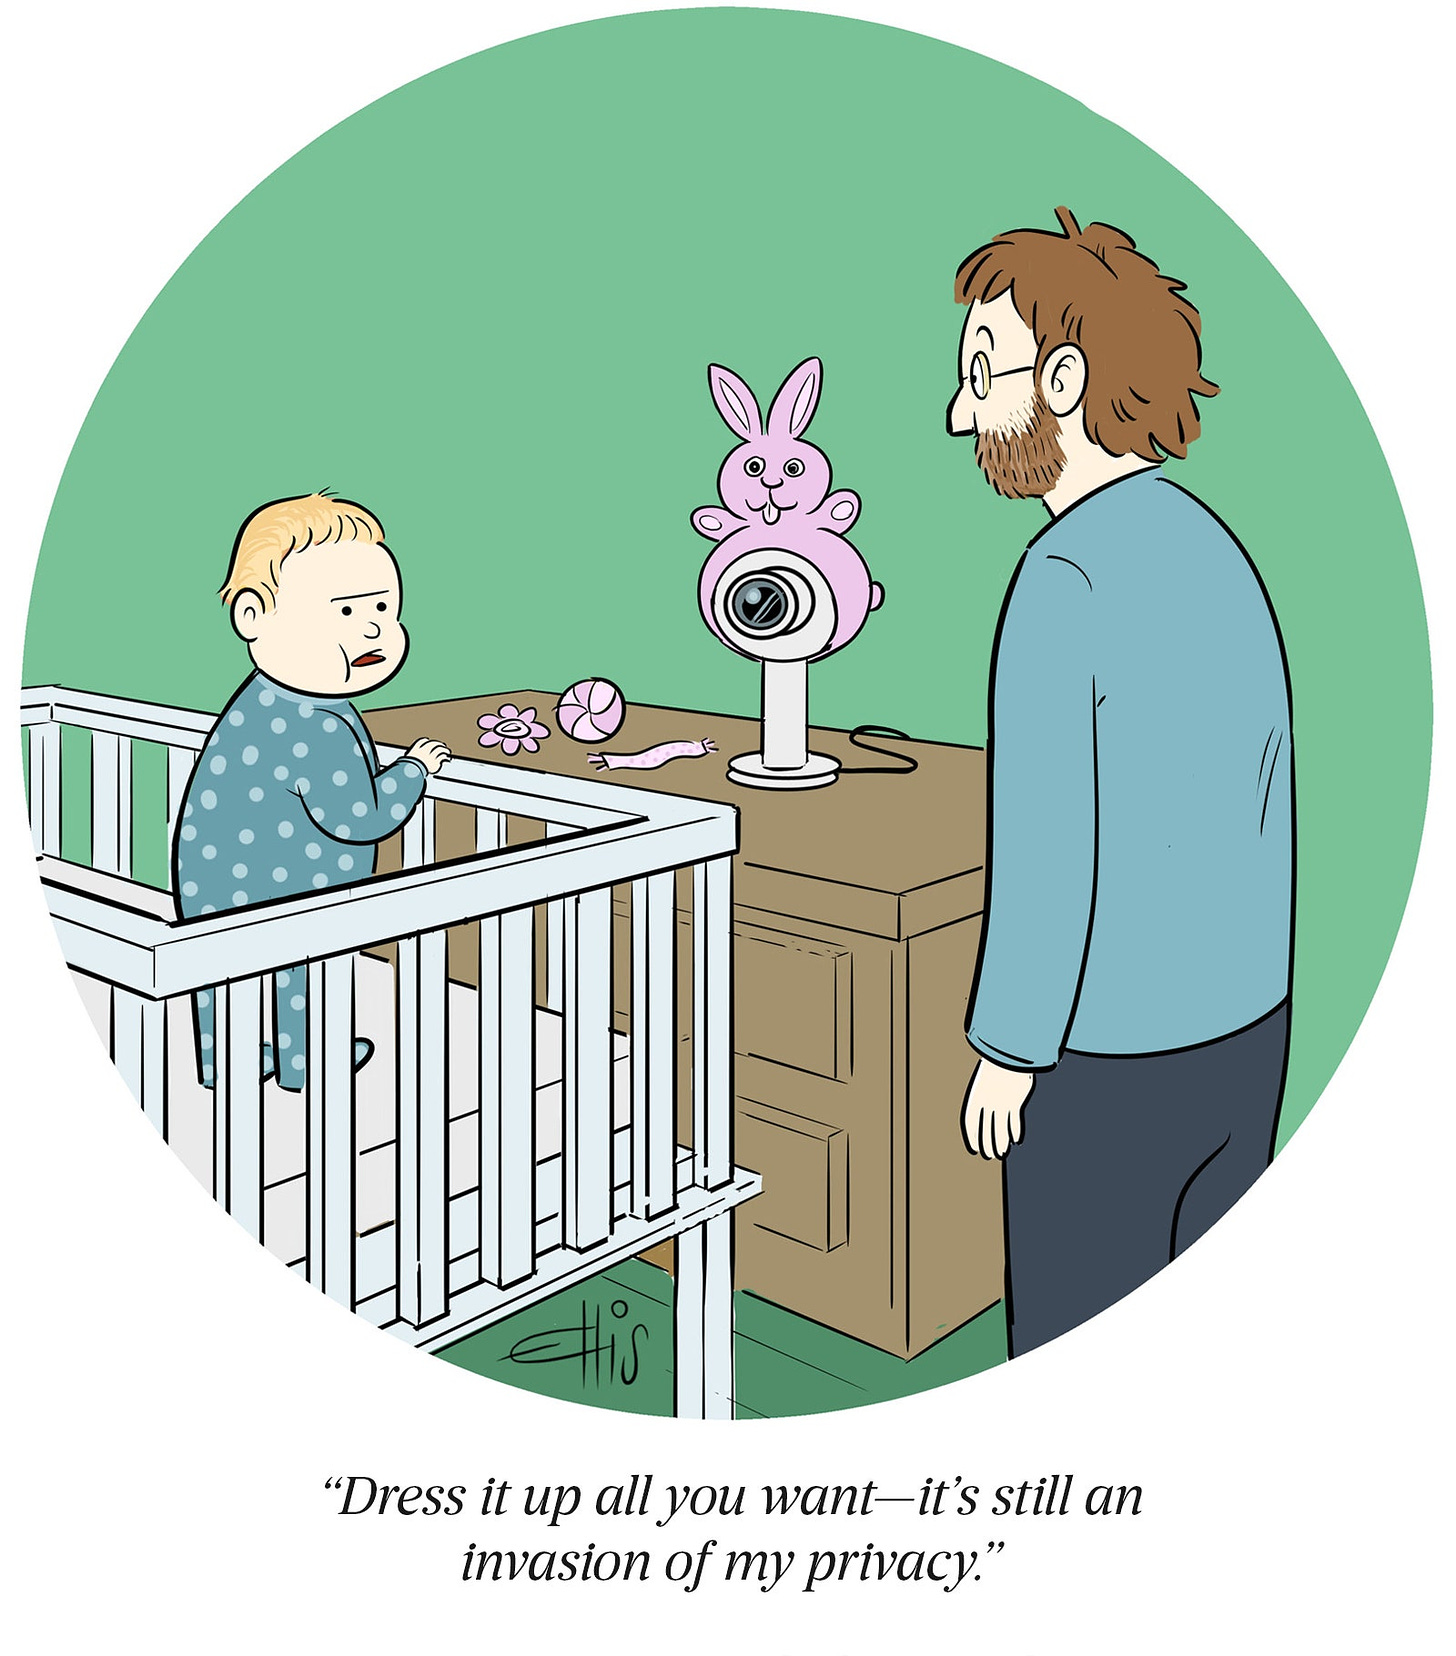 Cartoon of baby in crib pointing at baby monitory and telling dad Dress it up all you want it's still an invasion of privacy